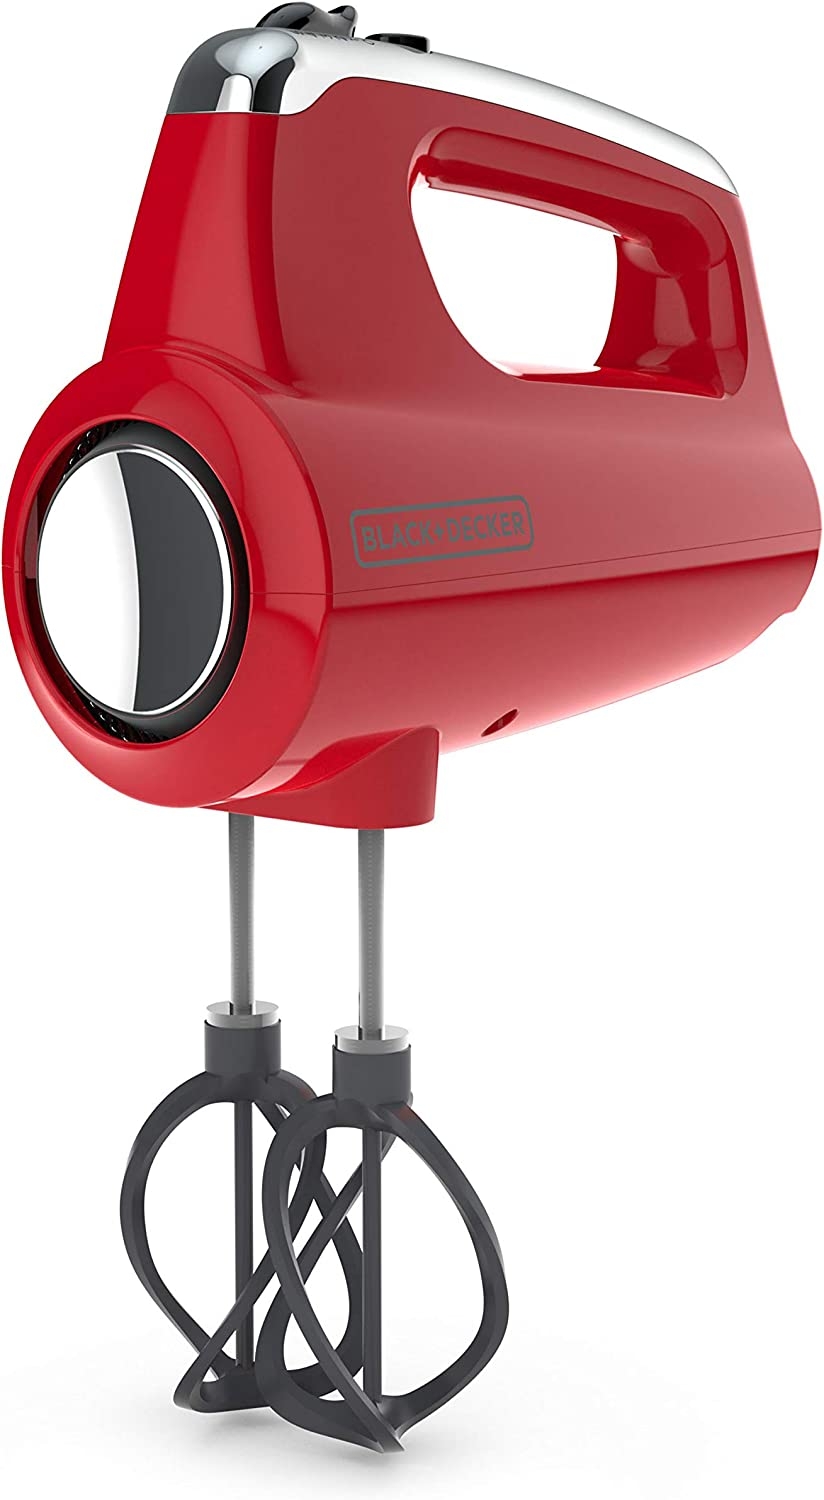 Black+Decker MX600R Helix Performance Premium Hand, 5-Speed Mixer, Red, small Import To Shop ×Product customization General